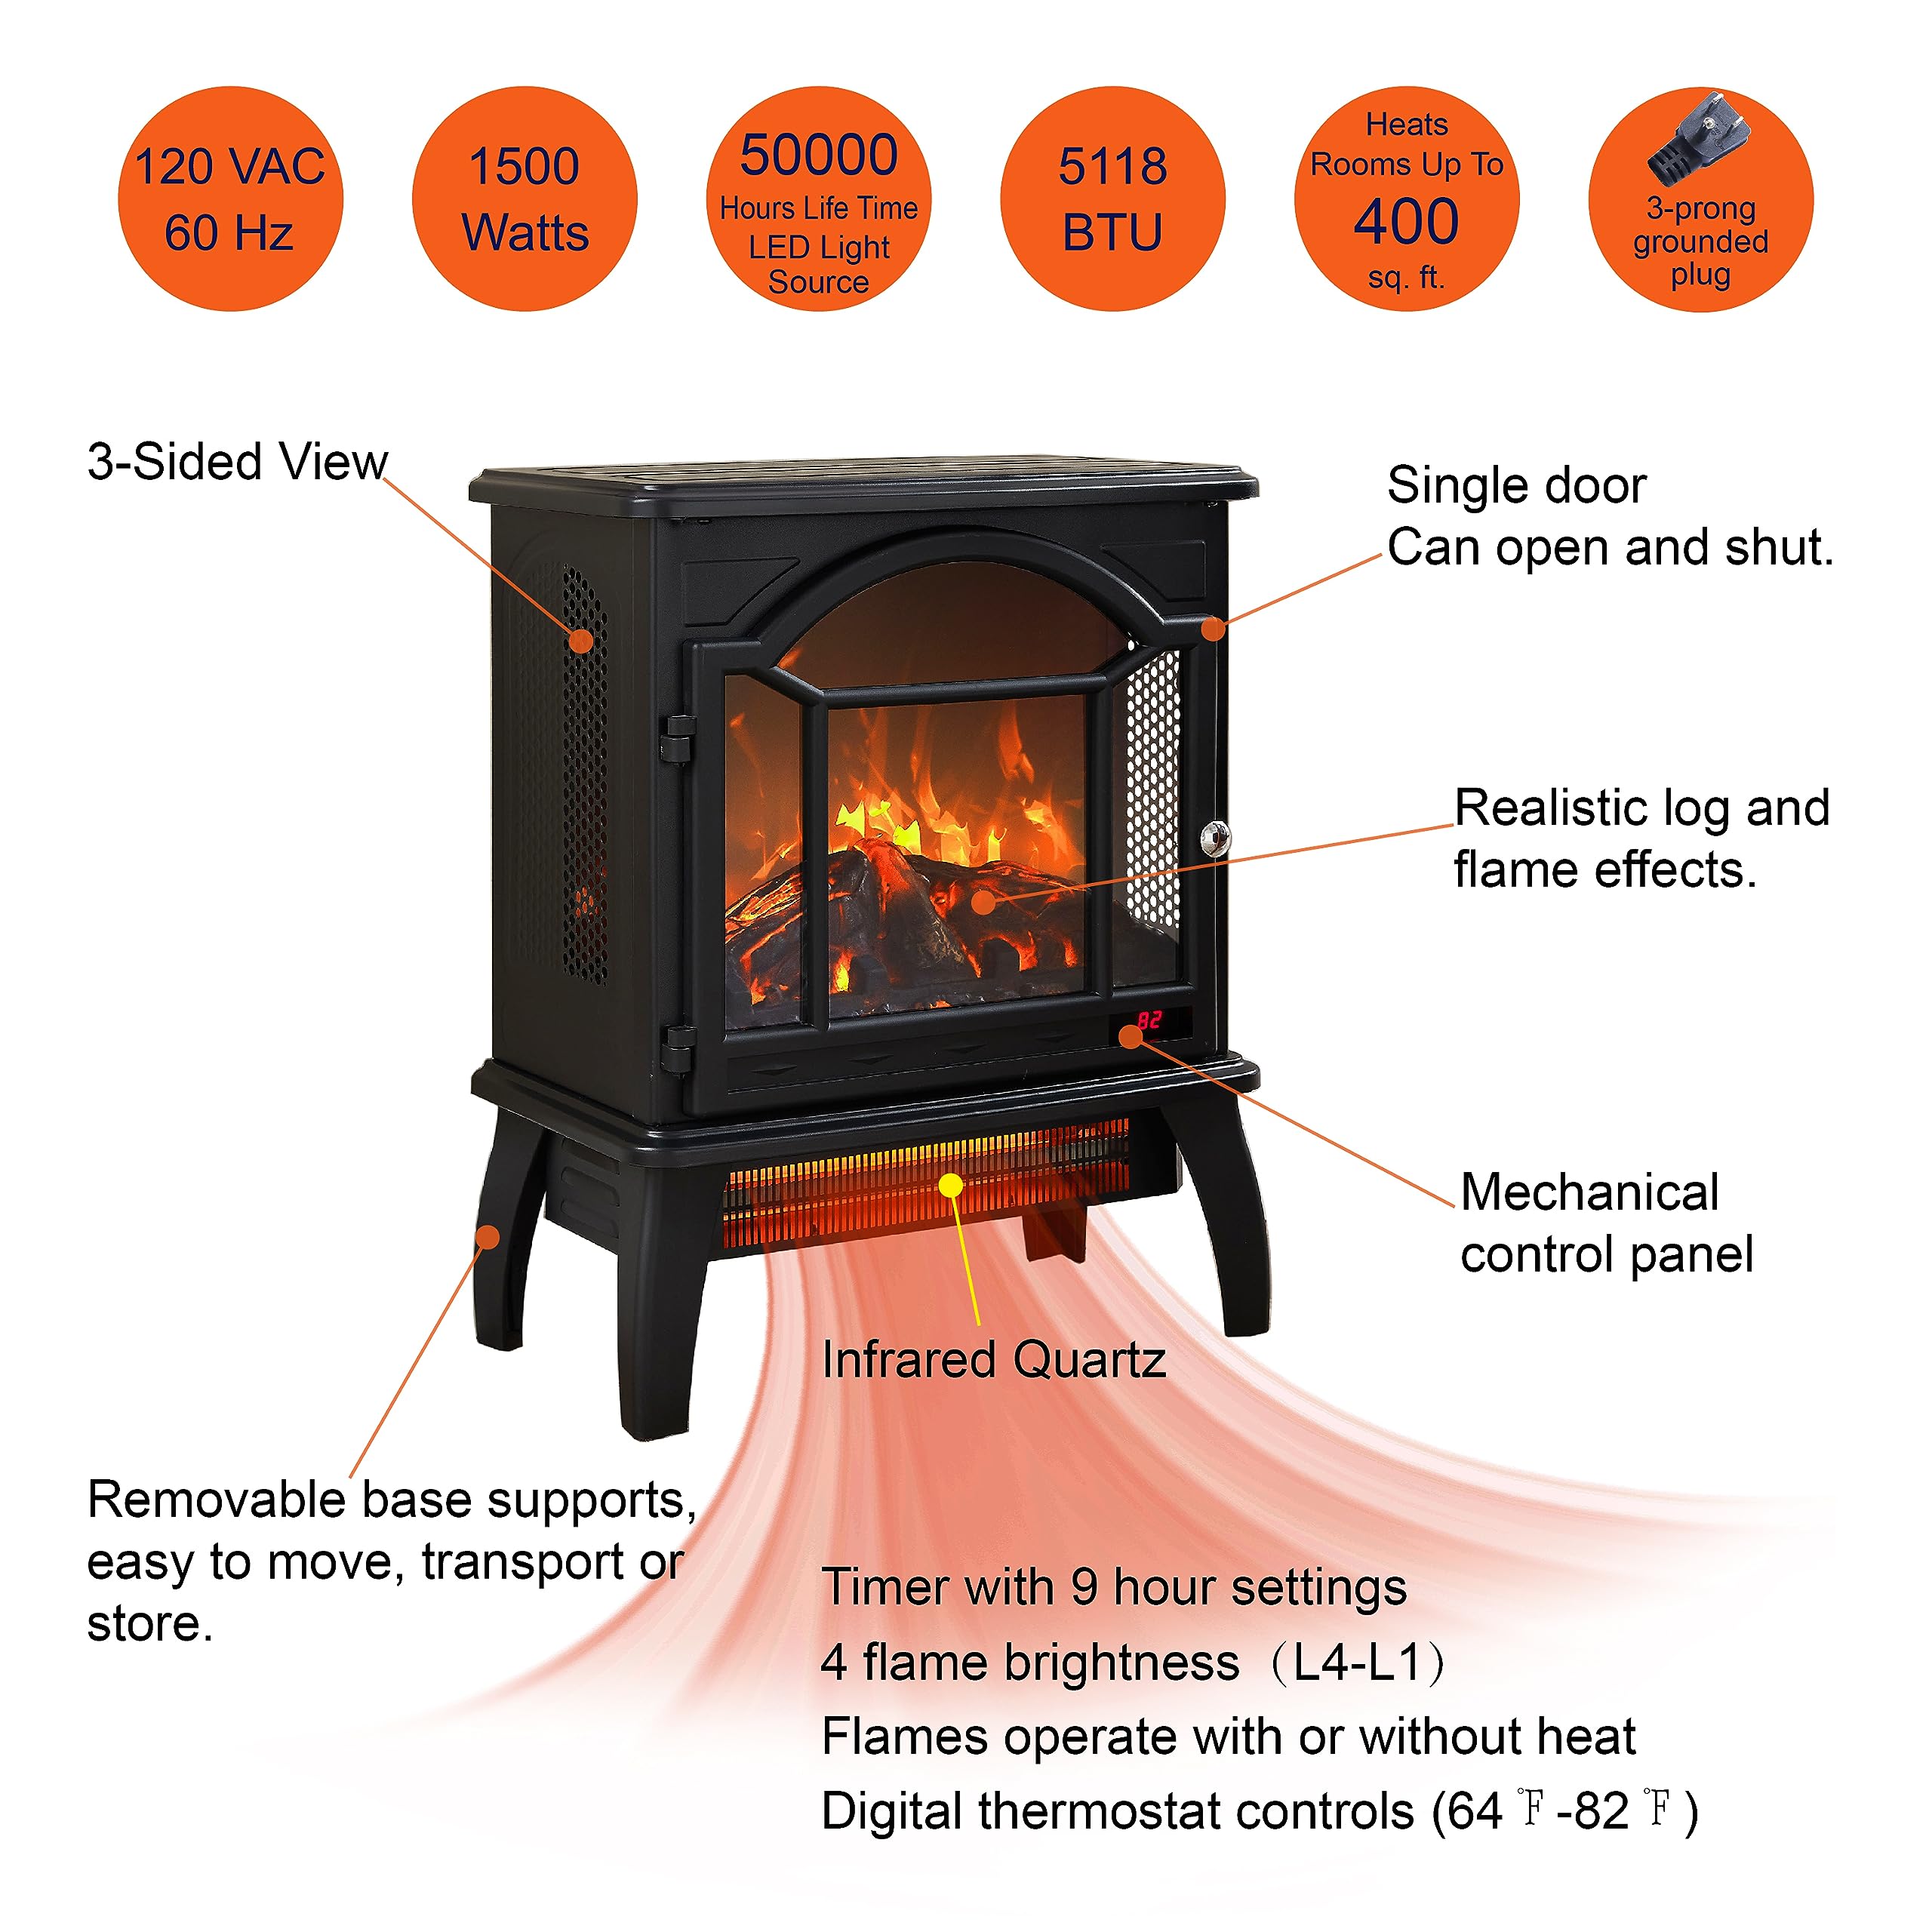 KOFOHON Freestanding Electric Fireplace Heater,Portable Infrared Fireplace Stove with 4 Types of 3D Realistic Flame Effects,Adjustable Temperature Compact Indoor Space Heater,Timer&Remote,18".